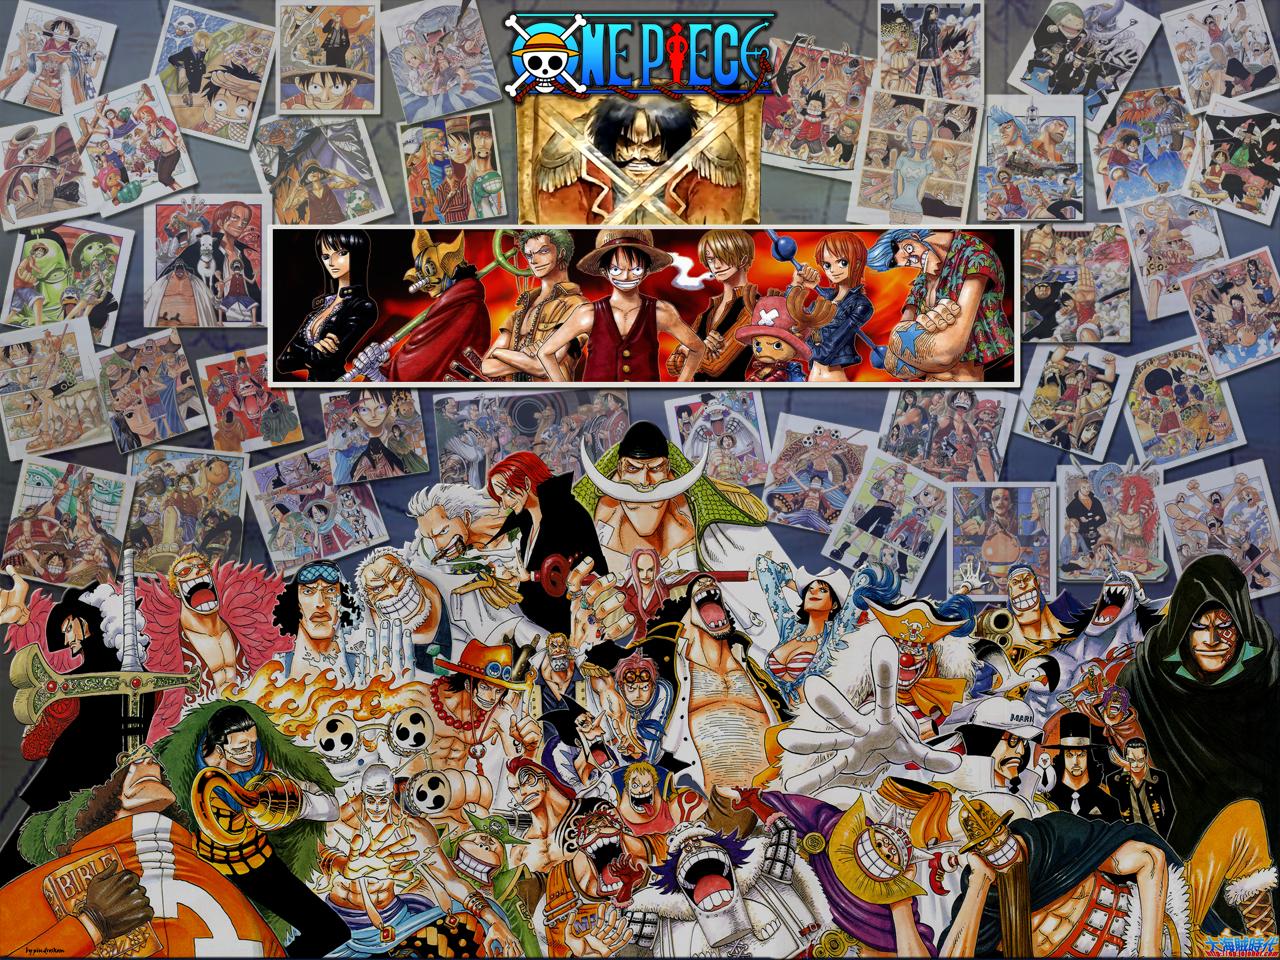 Franky Wallpaper 16 One Piece All Characters Anime Manga Wallpaper